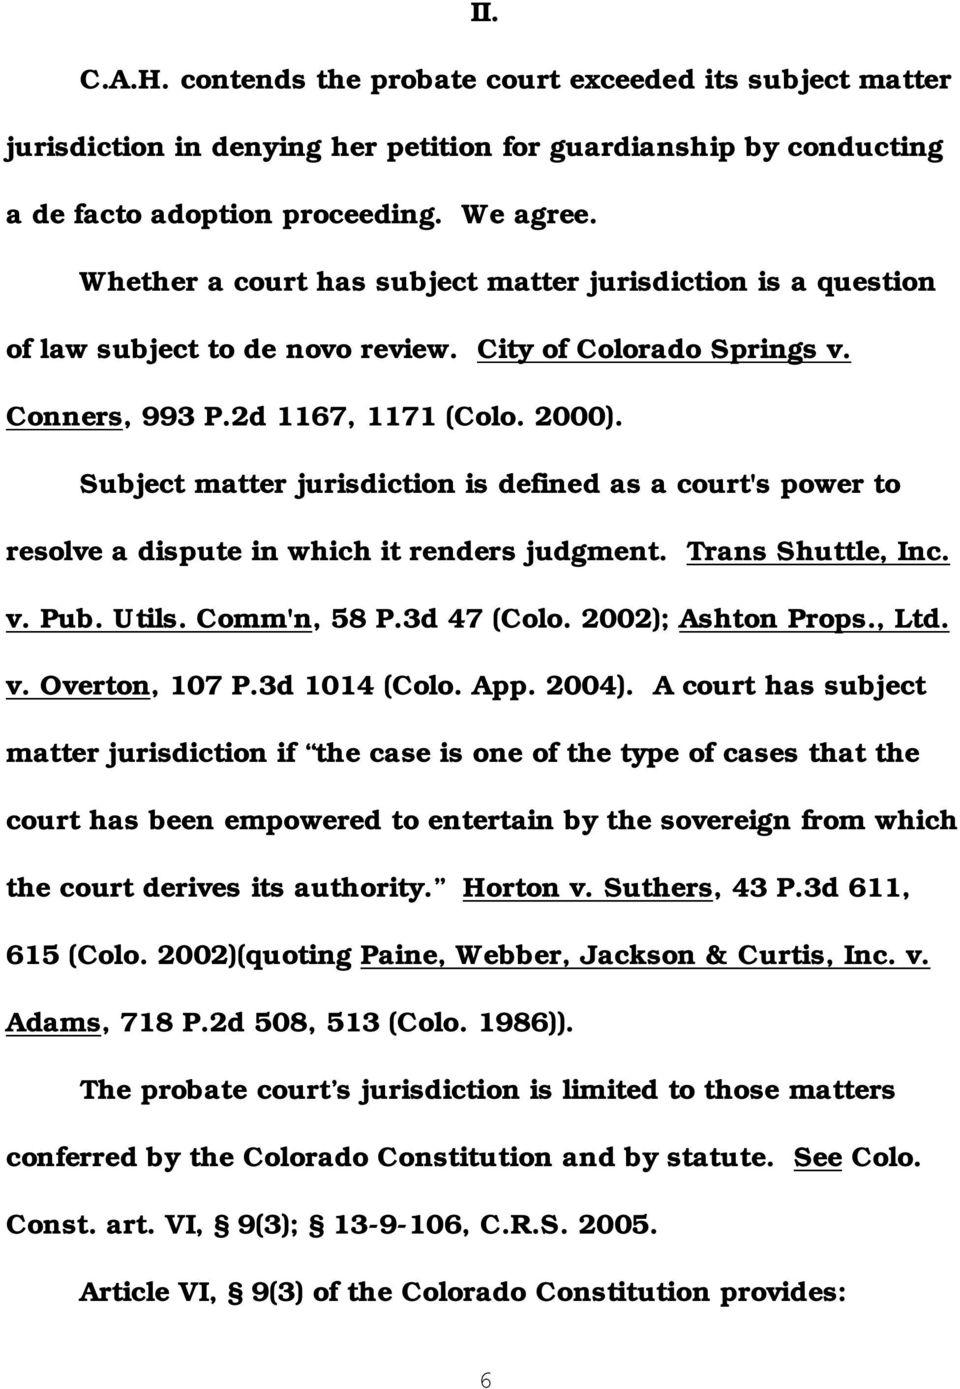 Subject matter jurisdiction is defined as a court's power to resolve a dispute in which it renders judgment. Trans Shuttle, Inc. v. Pub. Utils. Comm'n, 58 P.3d 47 (Colo. 2002); Ashton Props., Ltd. v. Overton, 107 P.